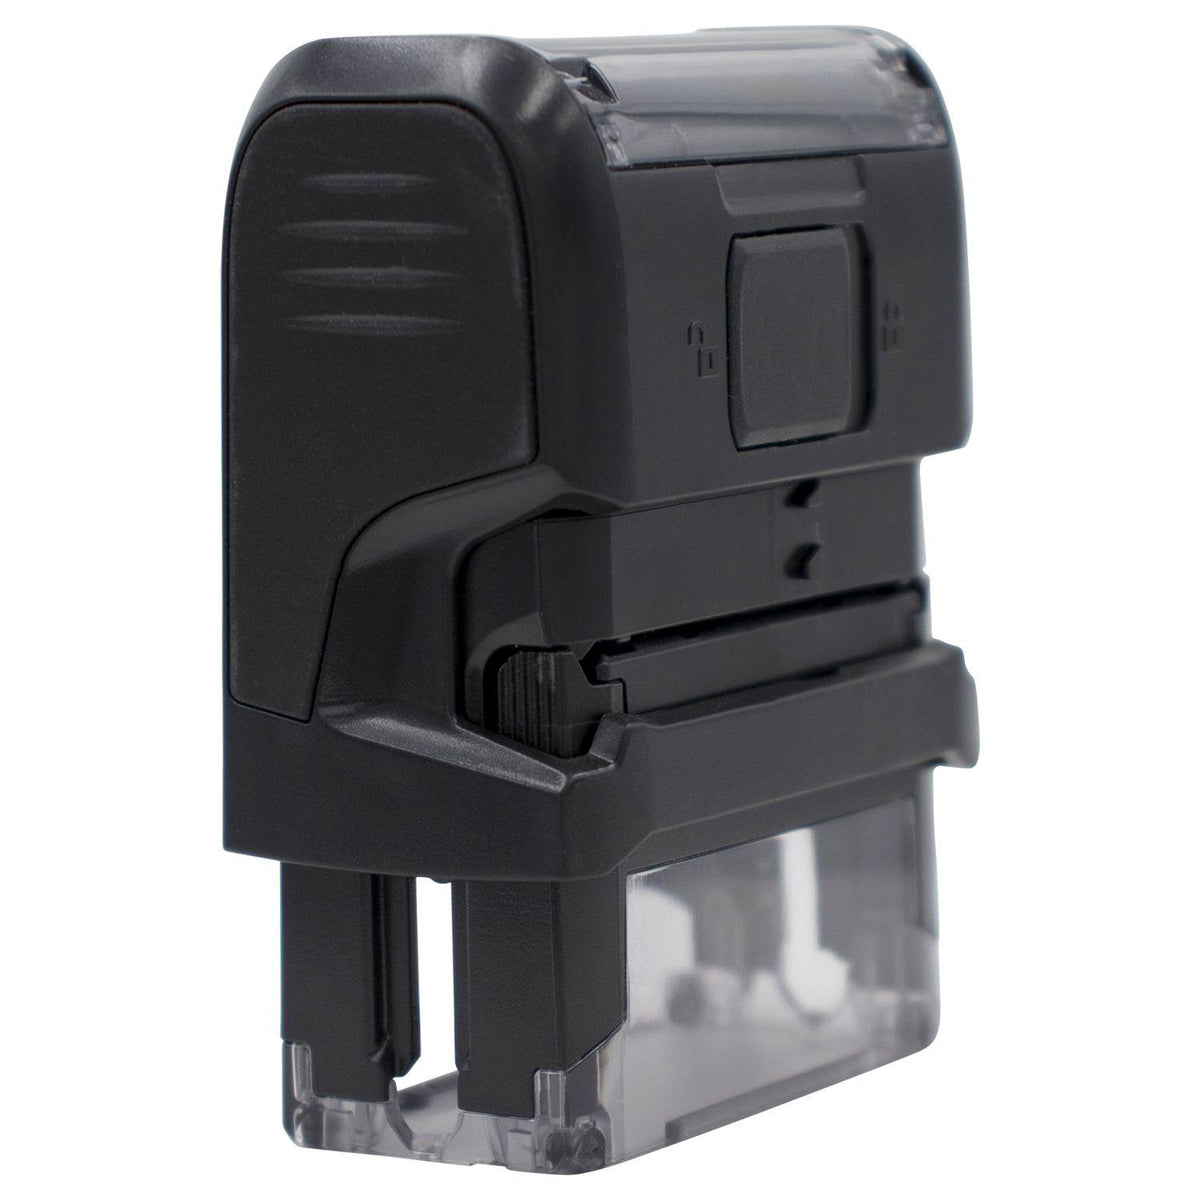 Self-Inking Credit Outline Stamp - Engineer Seal Stamps - Brand_Trodat, Impression Size_Small, Stamp Type_Self-Inking Stamp, Type of Use_Finance, Type of Use_Office, Type of Use_Professional